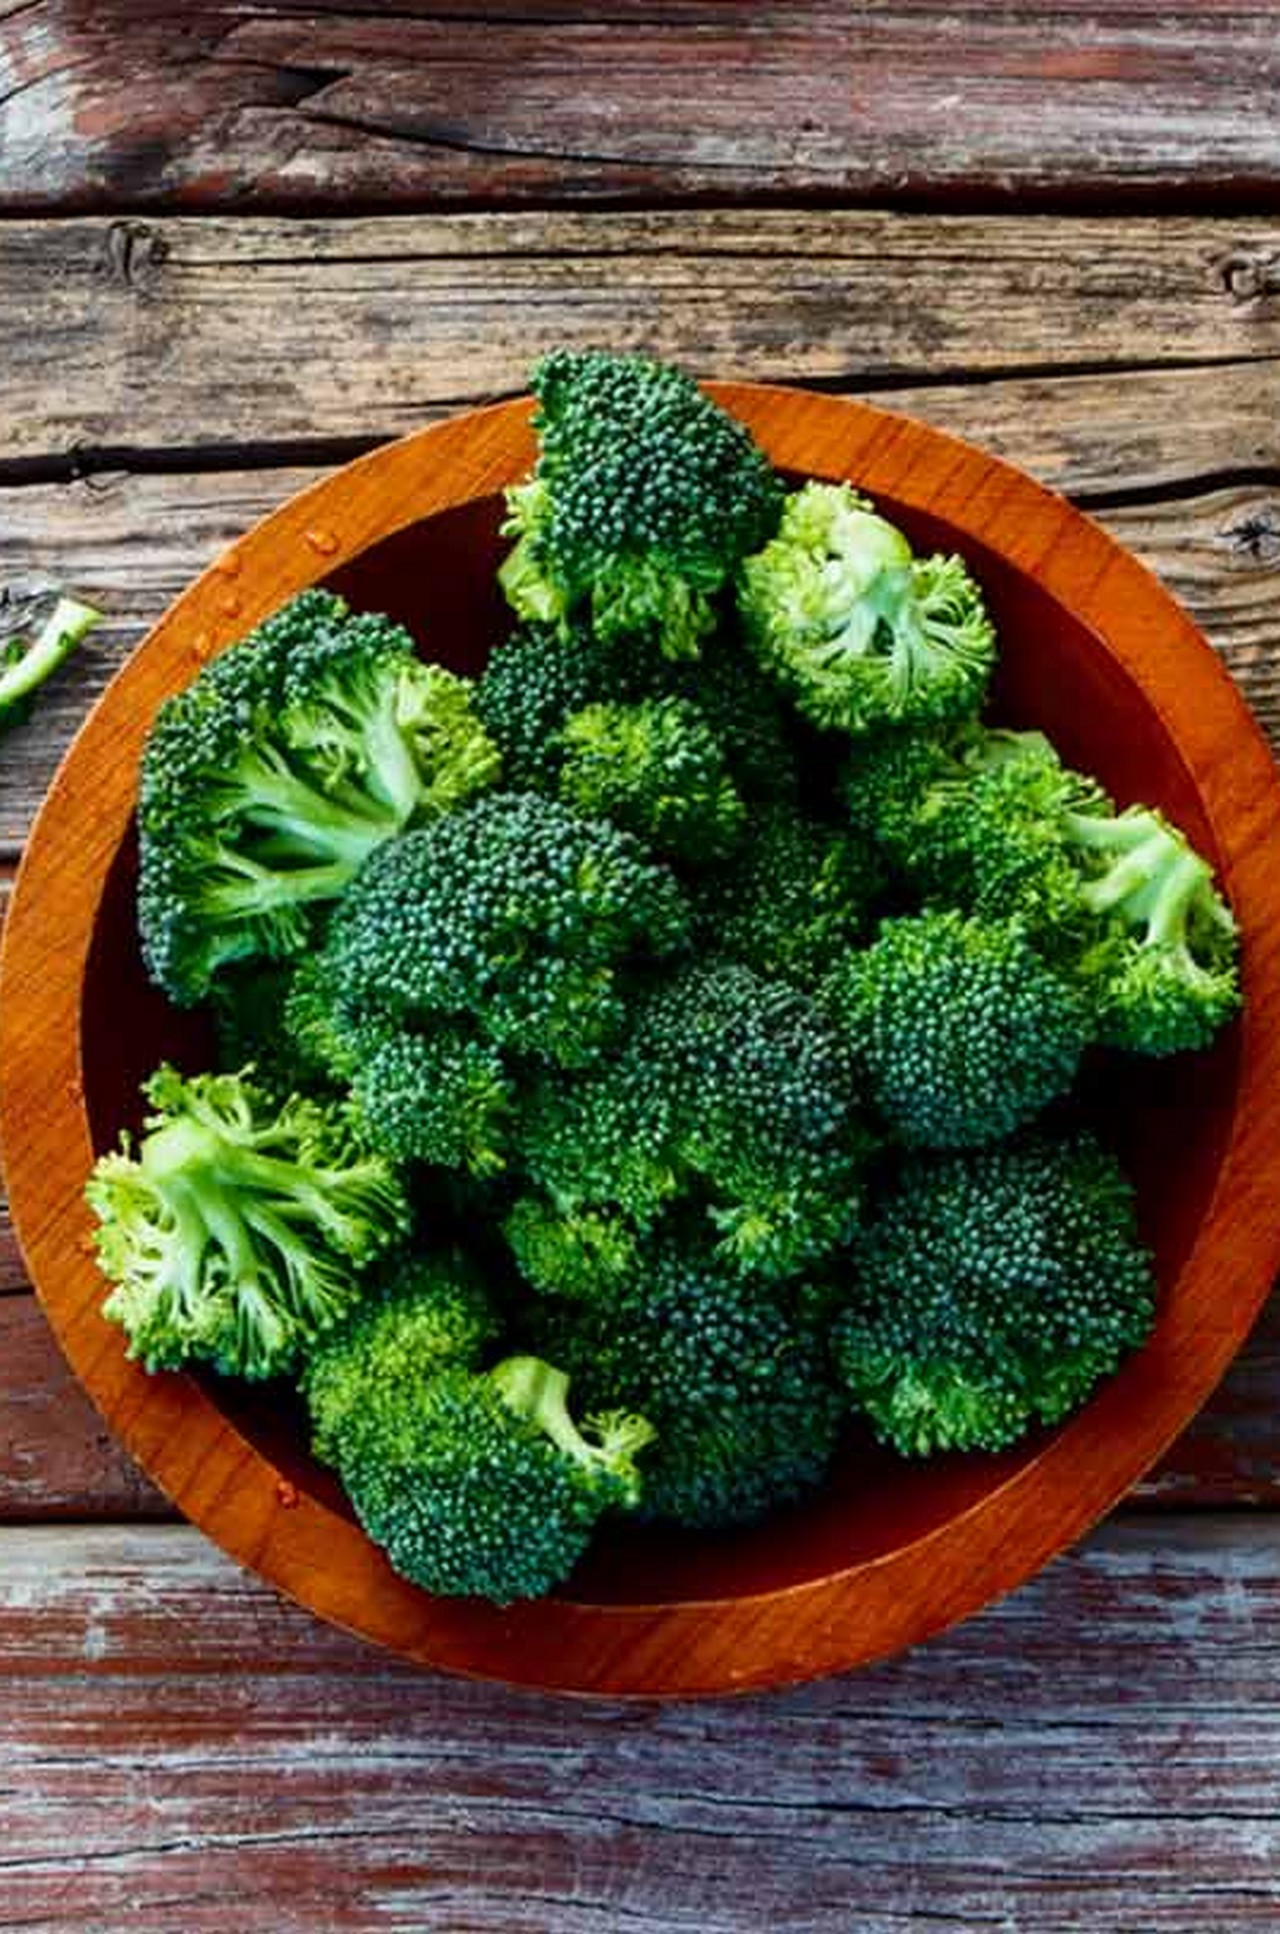  21 Benefits Of Broccoli, Nutrition, Recipes, & Side Effects